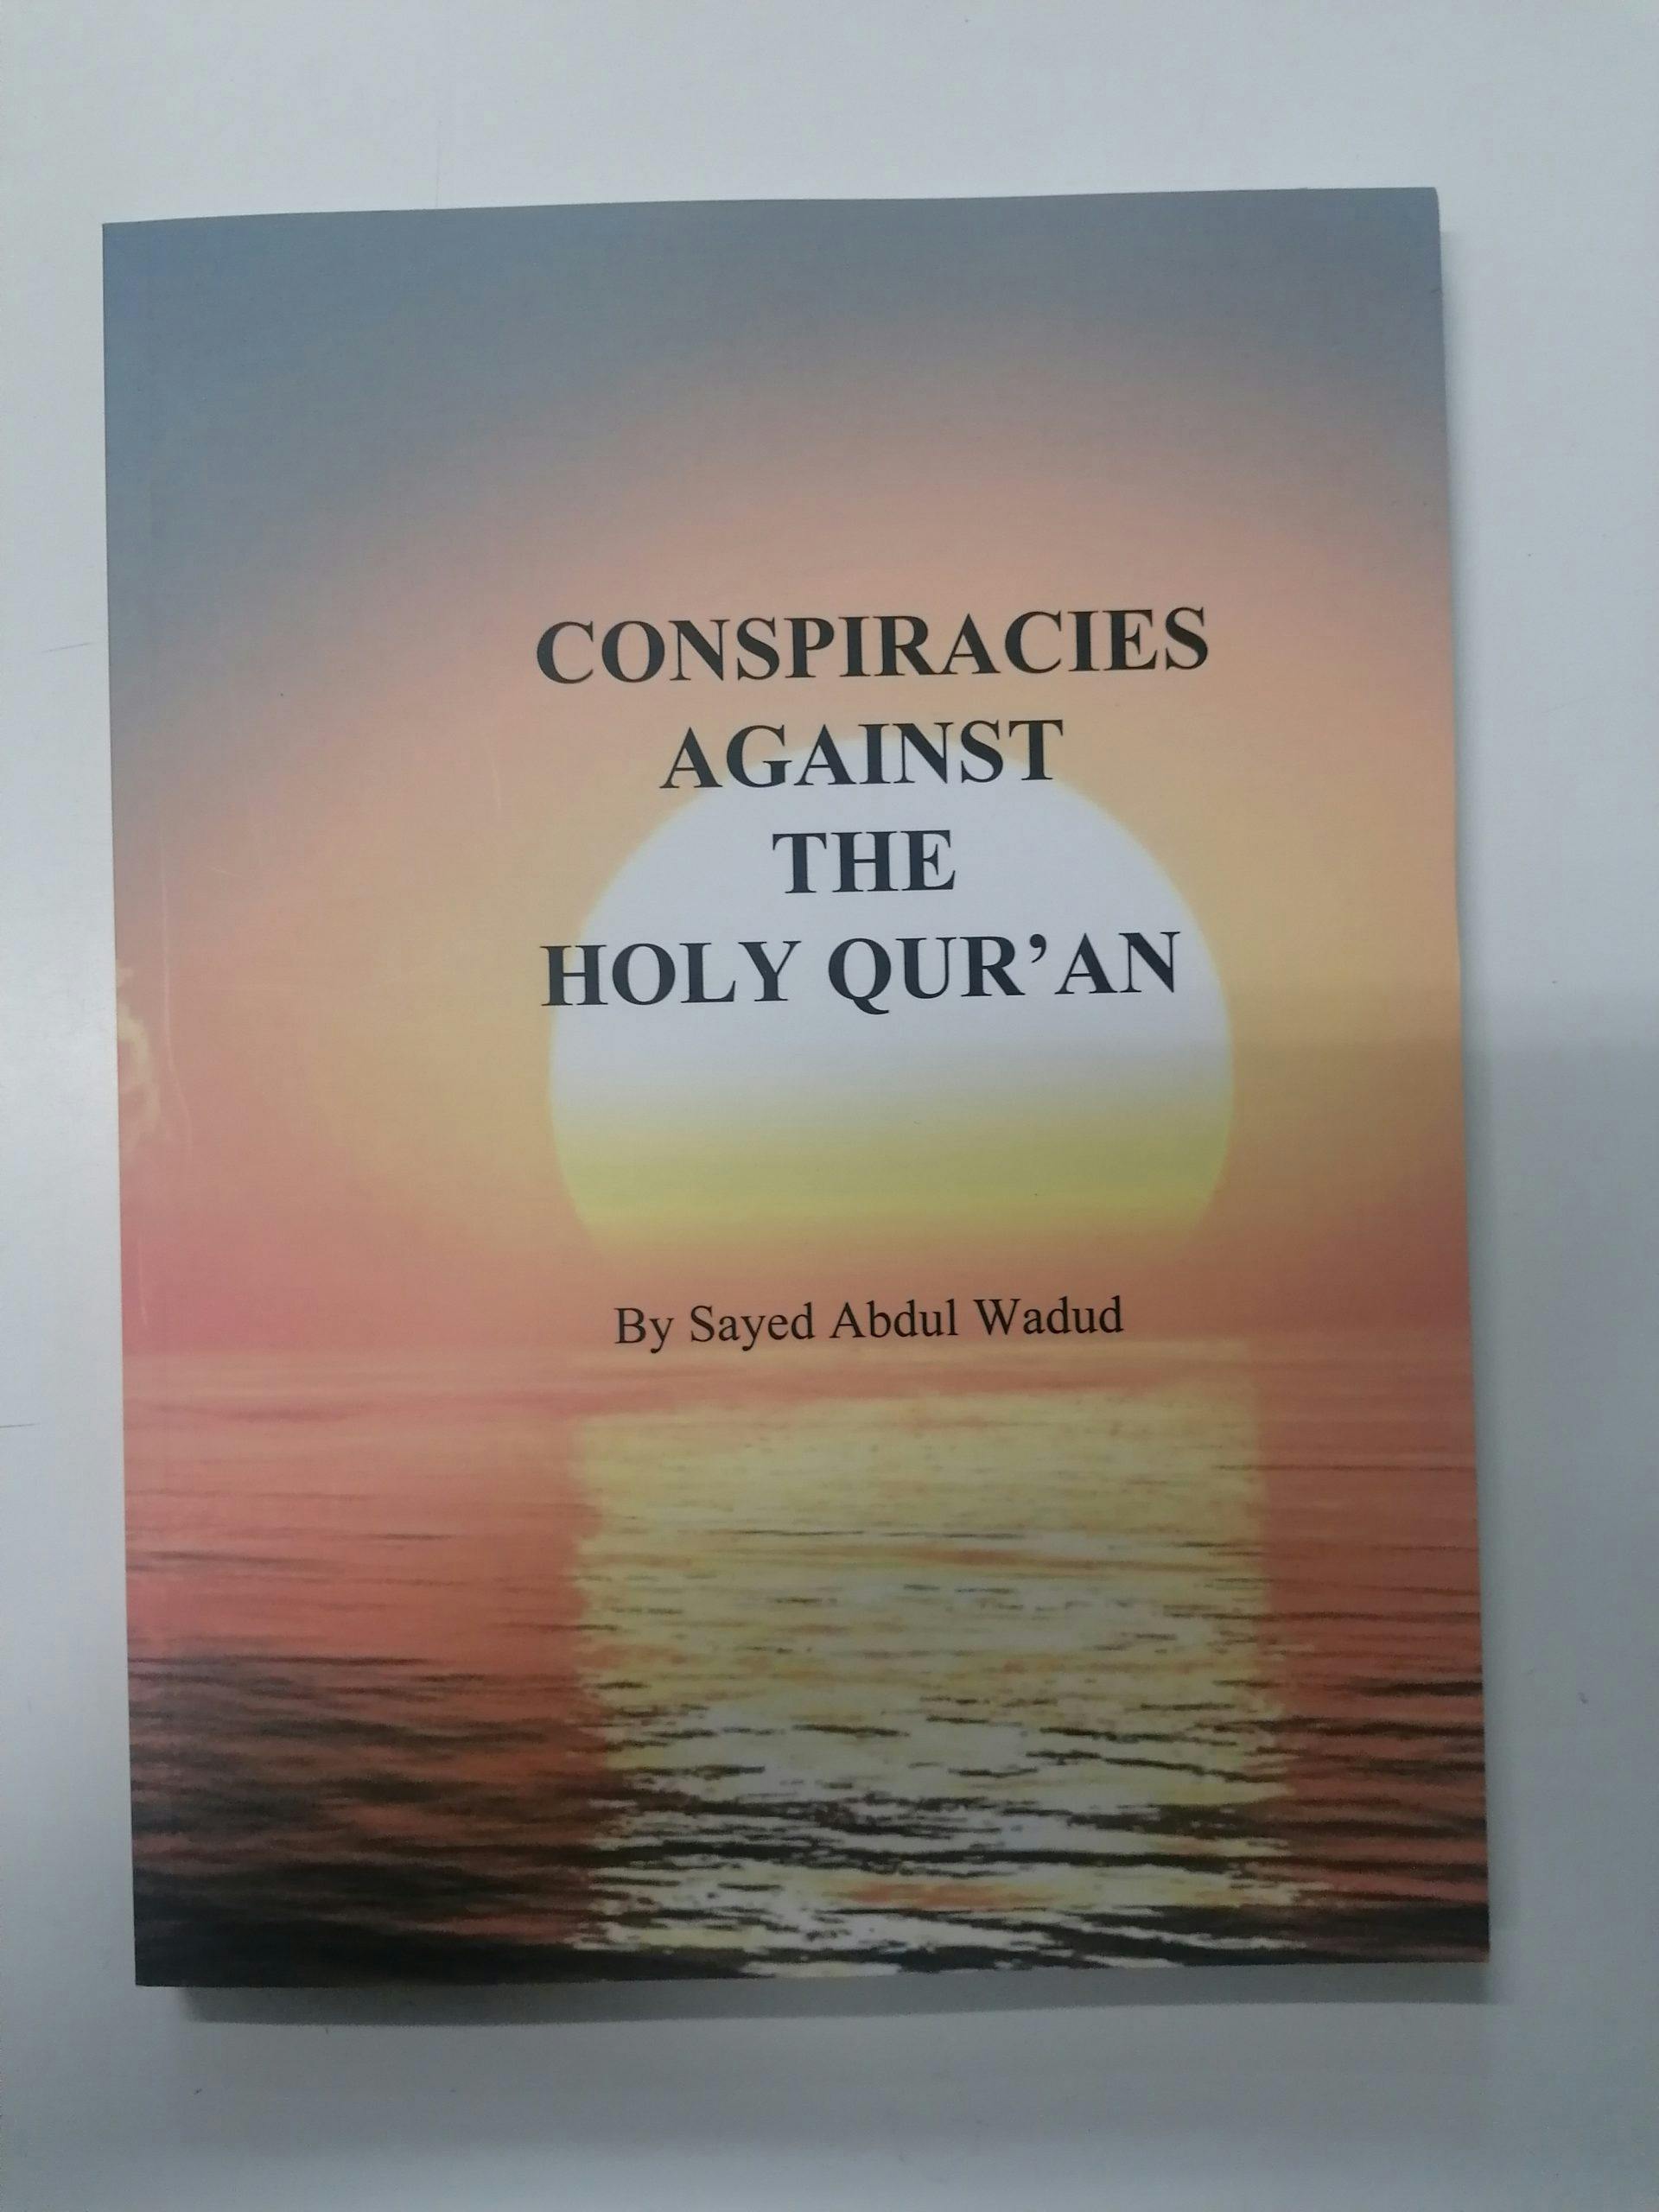 Conspiracies Against The Holy Qura'an